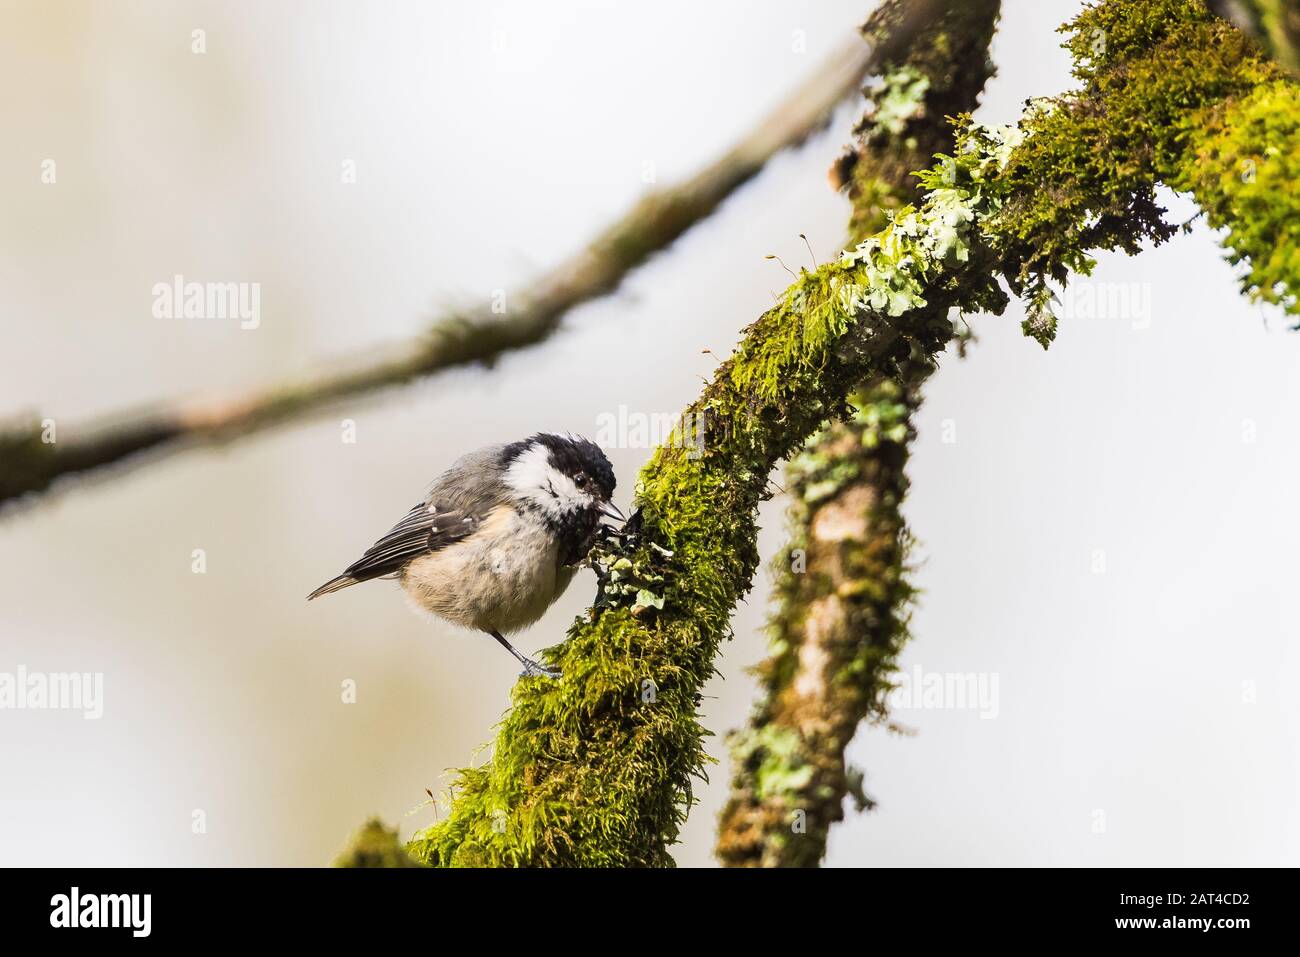 Coal tit on mossy branch Stock Photo